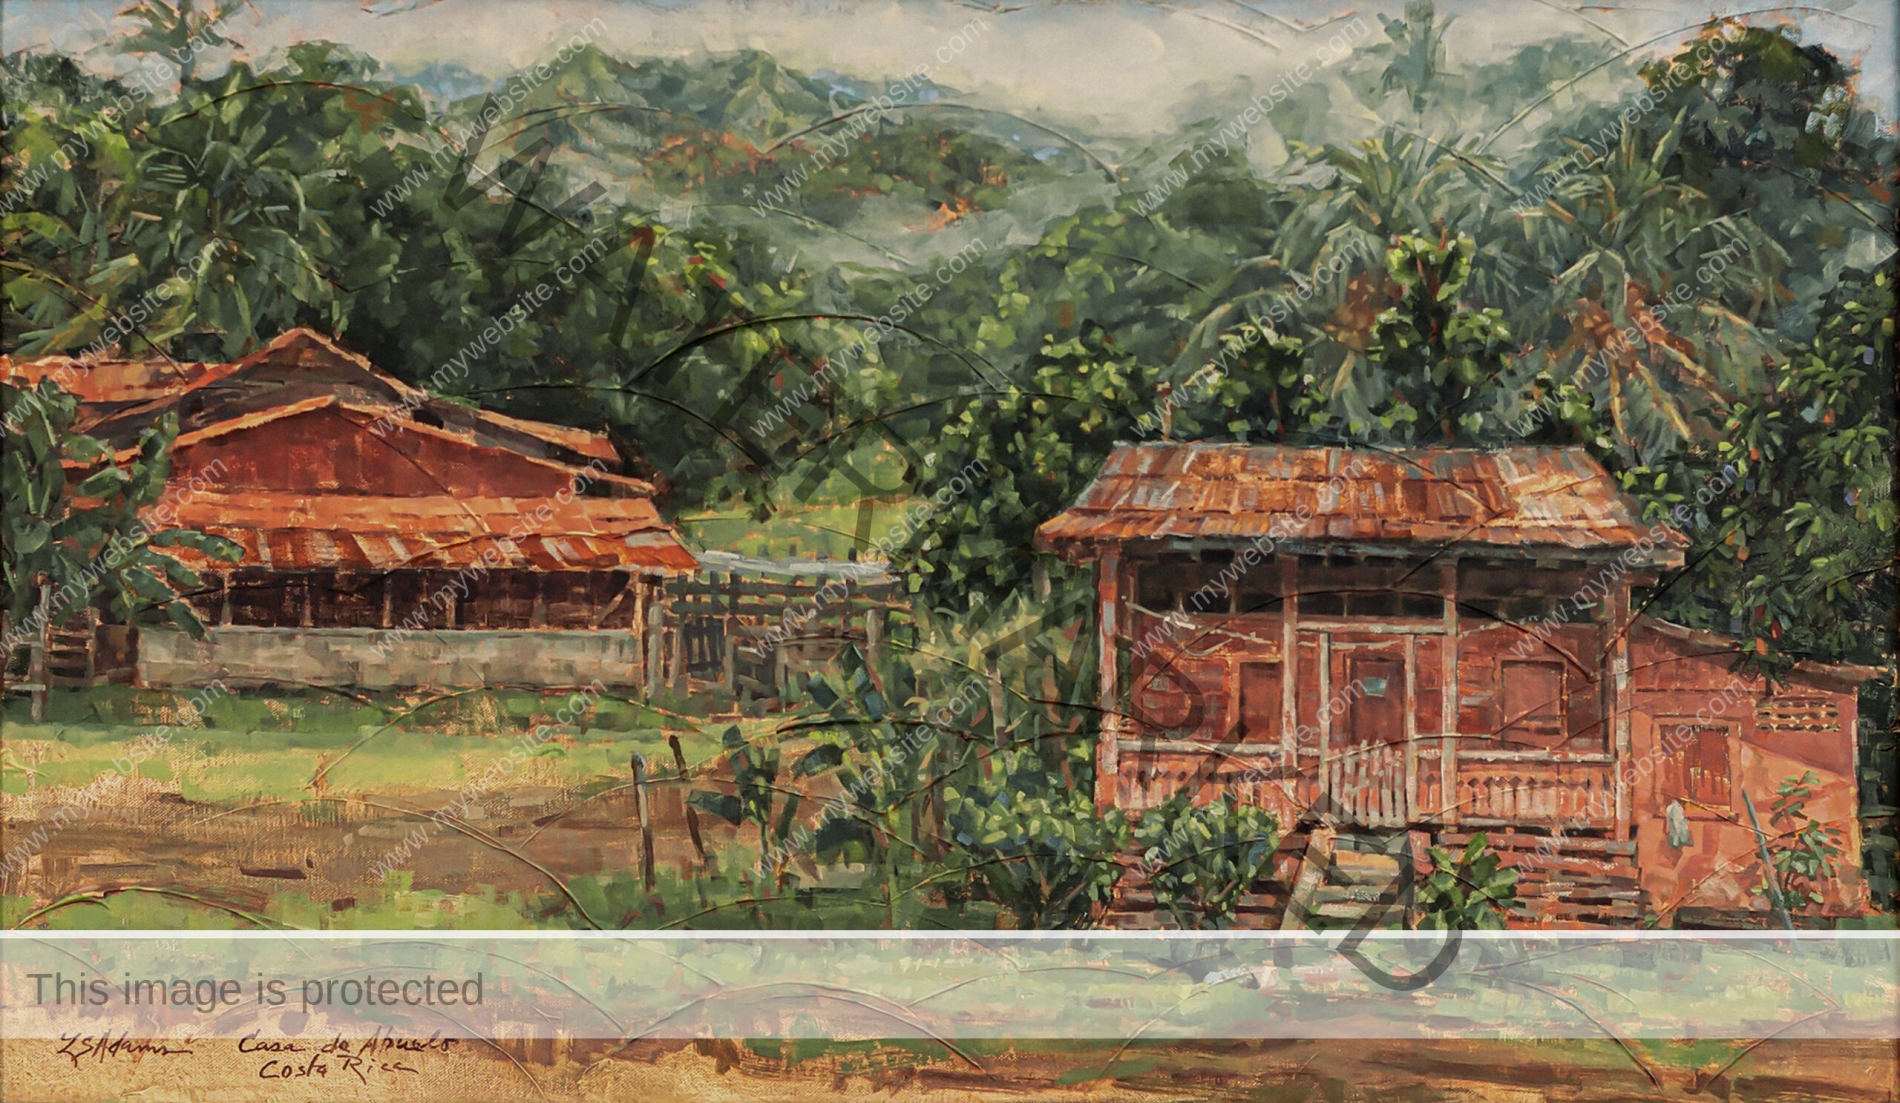 A typical Guanacaste scene by Susan Adams, depicting typical Costa Rican houses nestled in the lush foliage with mountains looming in th background.